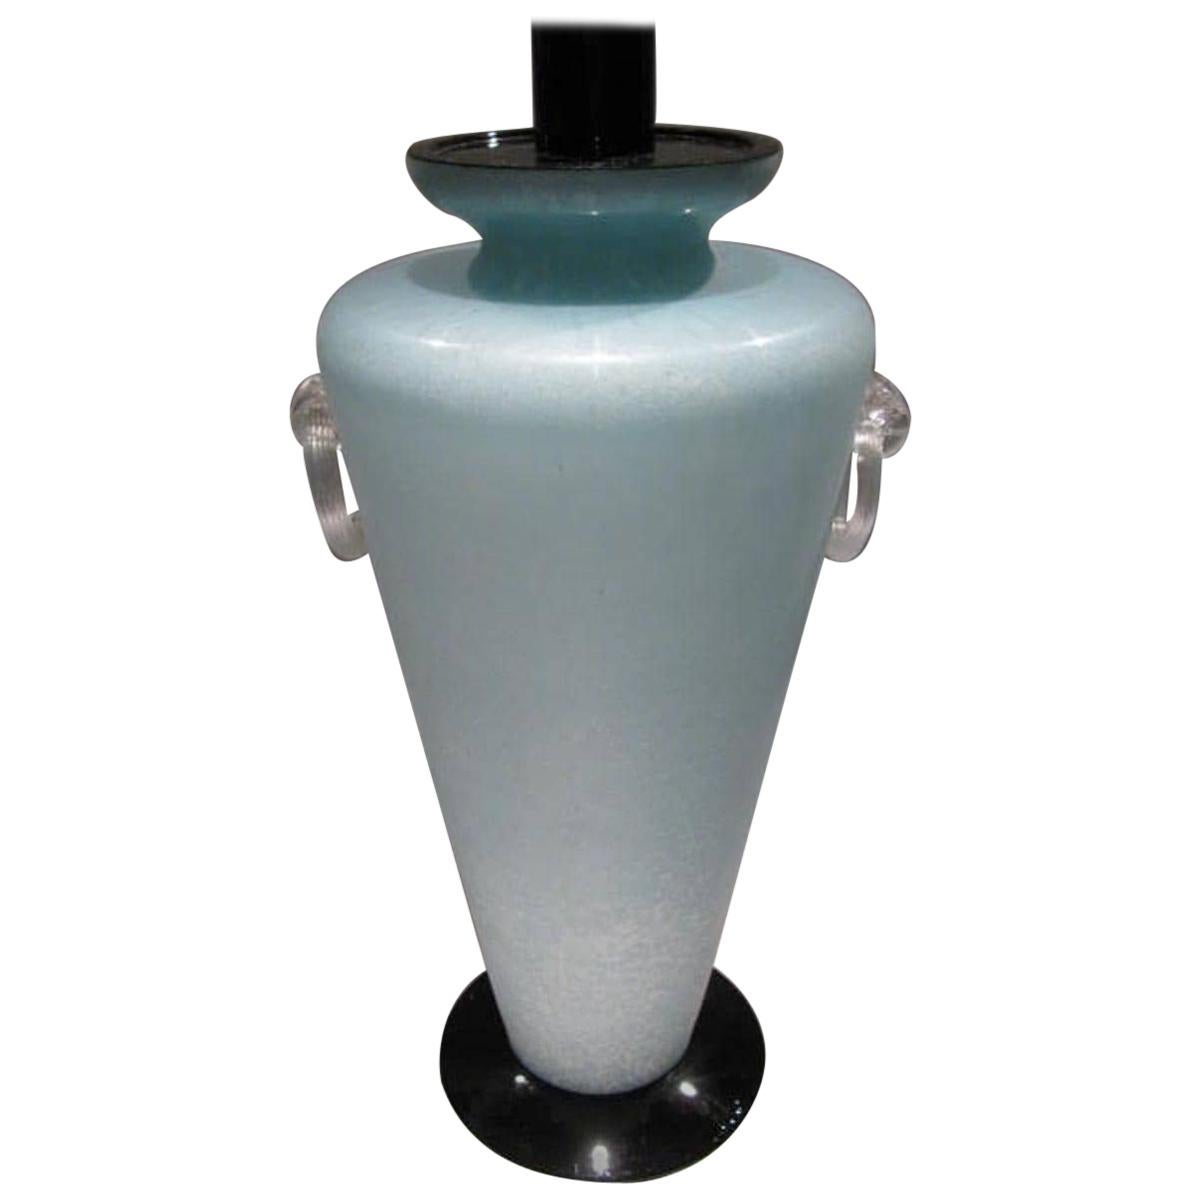 A Scavo technique aquamarine-green color glass vase mounted as circular table lamp, made in Murano, near Venice, Italy, circa 1980s.
The Scavo finished glass, hand blown in a beautiful aquamarine green tone and black details, offers an elegant